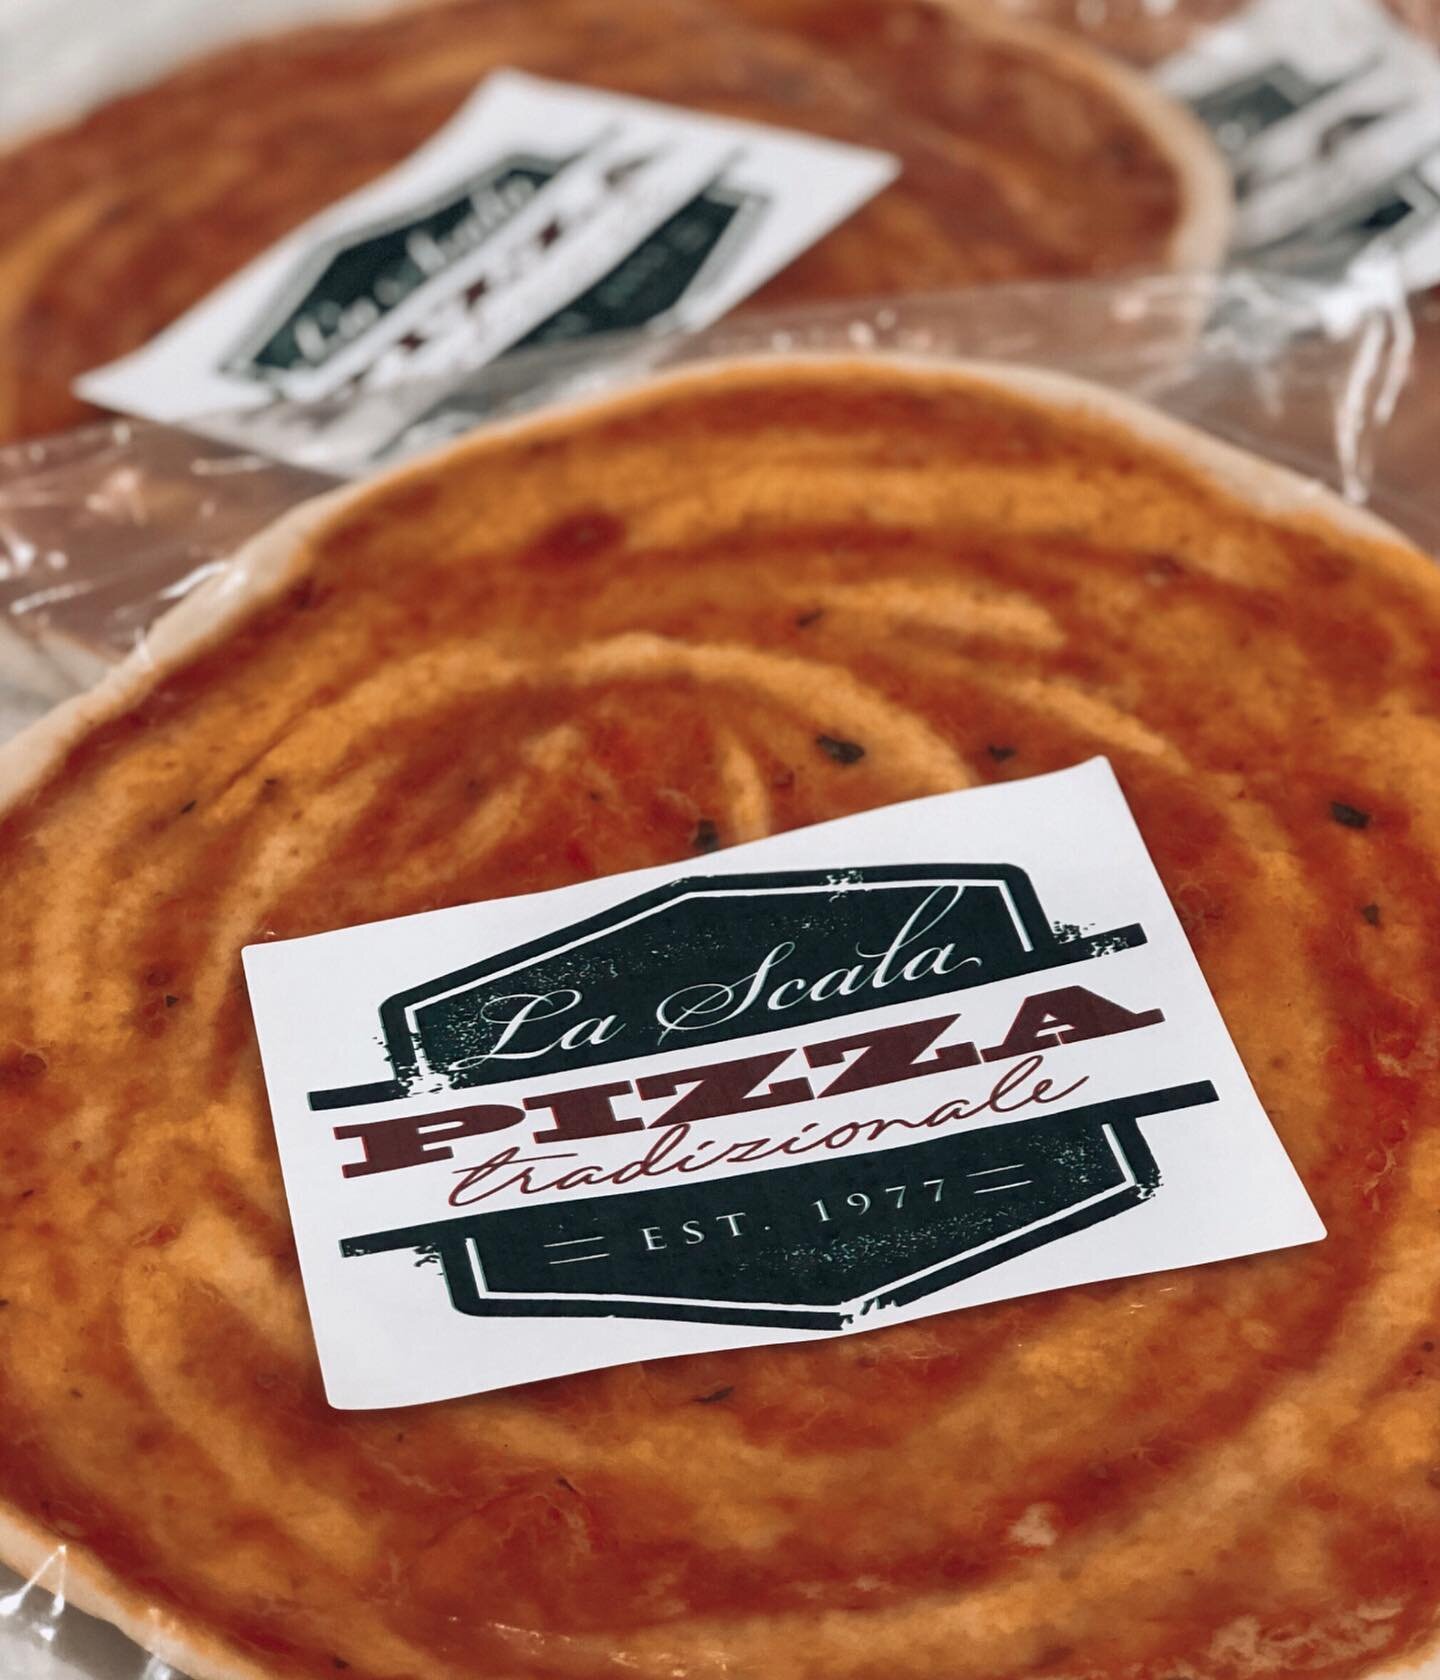 La Scala is now supplying local grocers @broomesfruitveg &amp; @lapiccolagrosseria with packaged traditional pizza bases, gnocchi and pasta sauces 🍕🍝